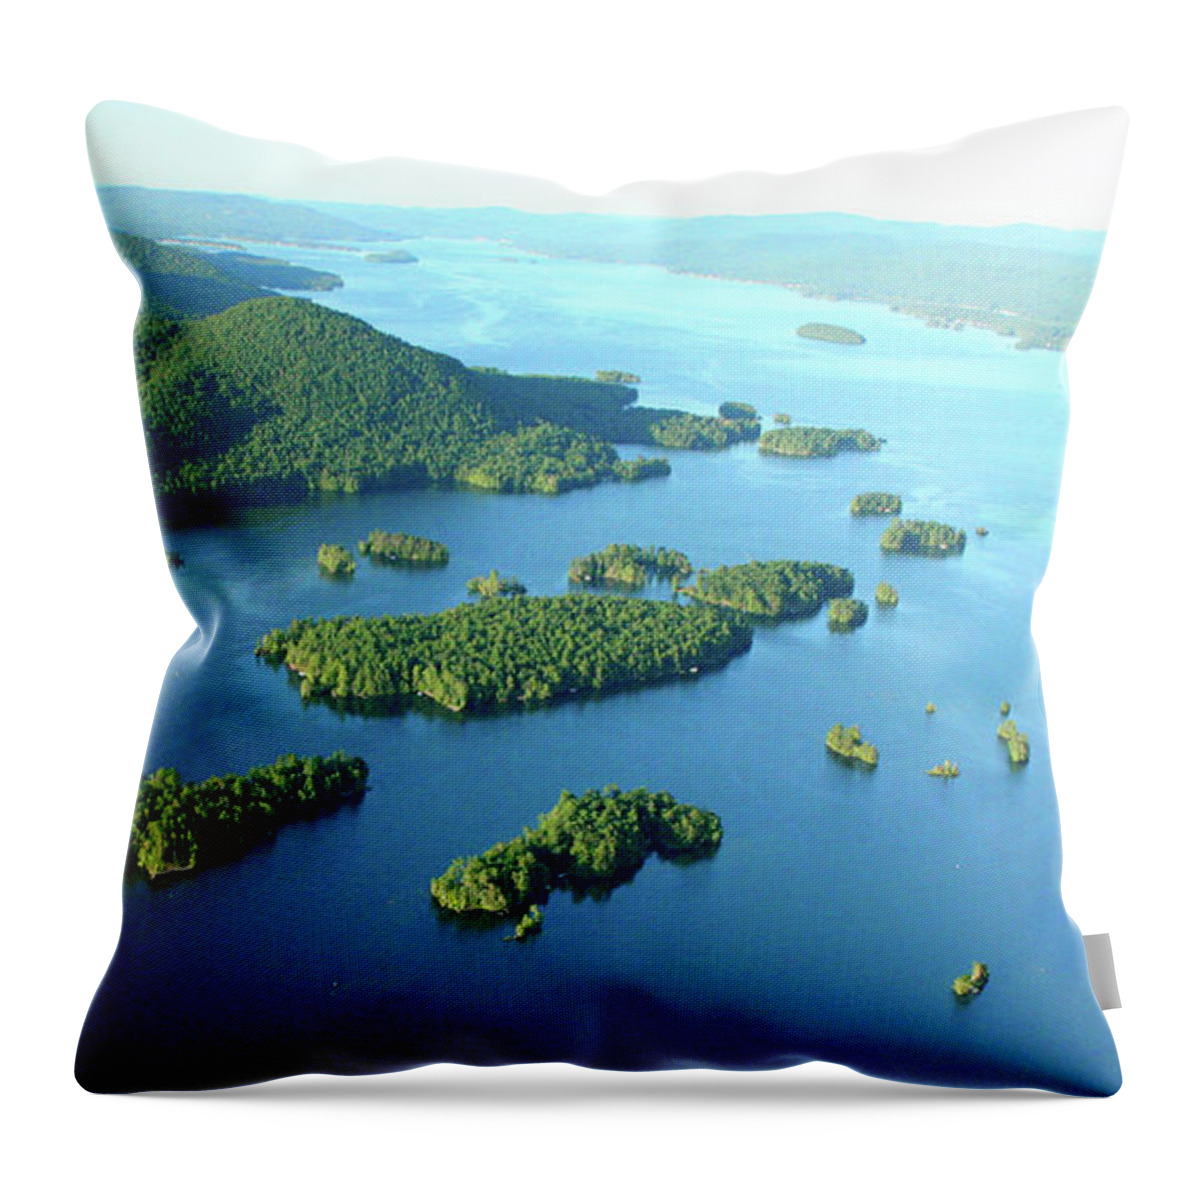 Tranquility Throw Pillow featuring the photograph Lake George Narrows Looking North by Jerry Trudell The Skys The Limit